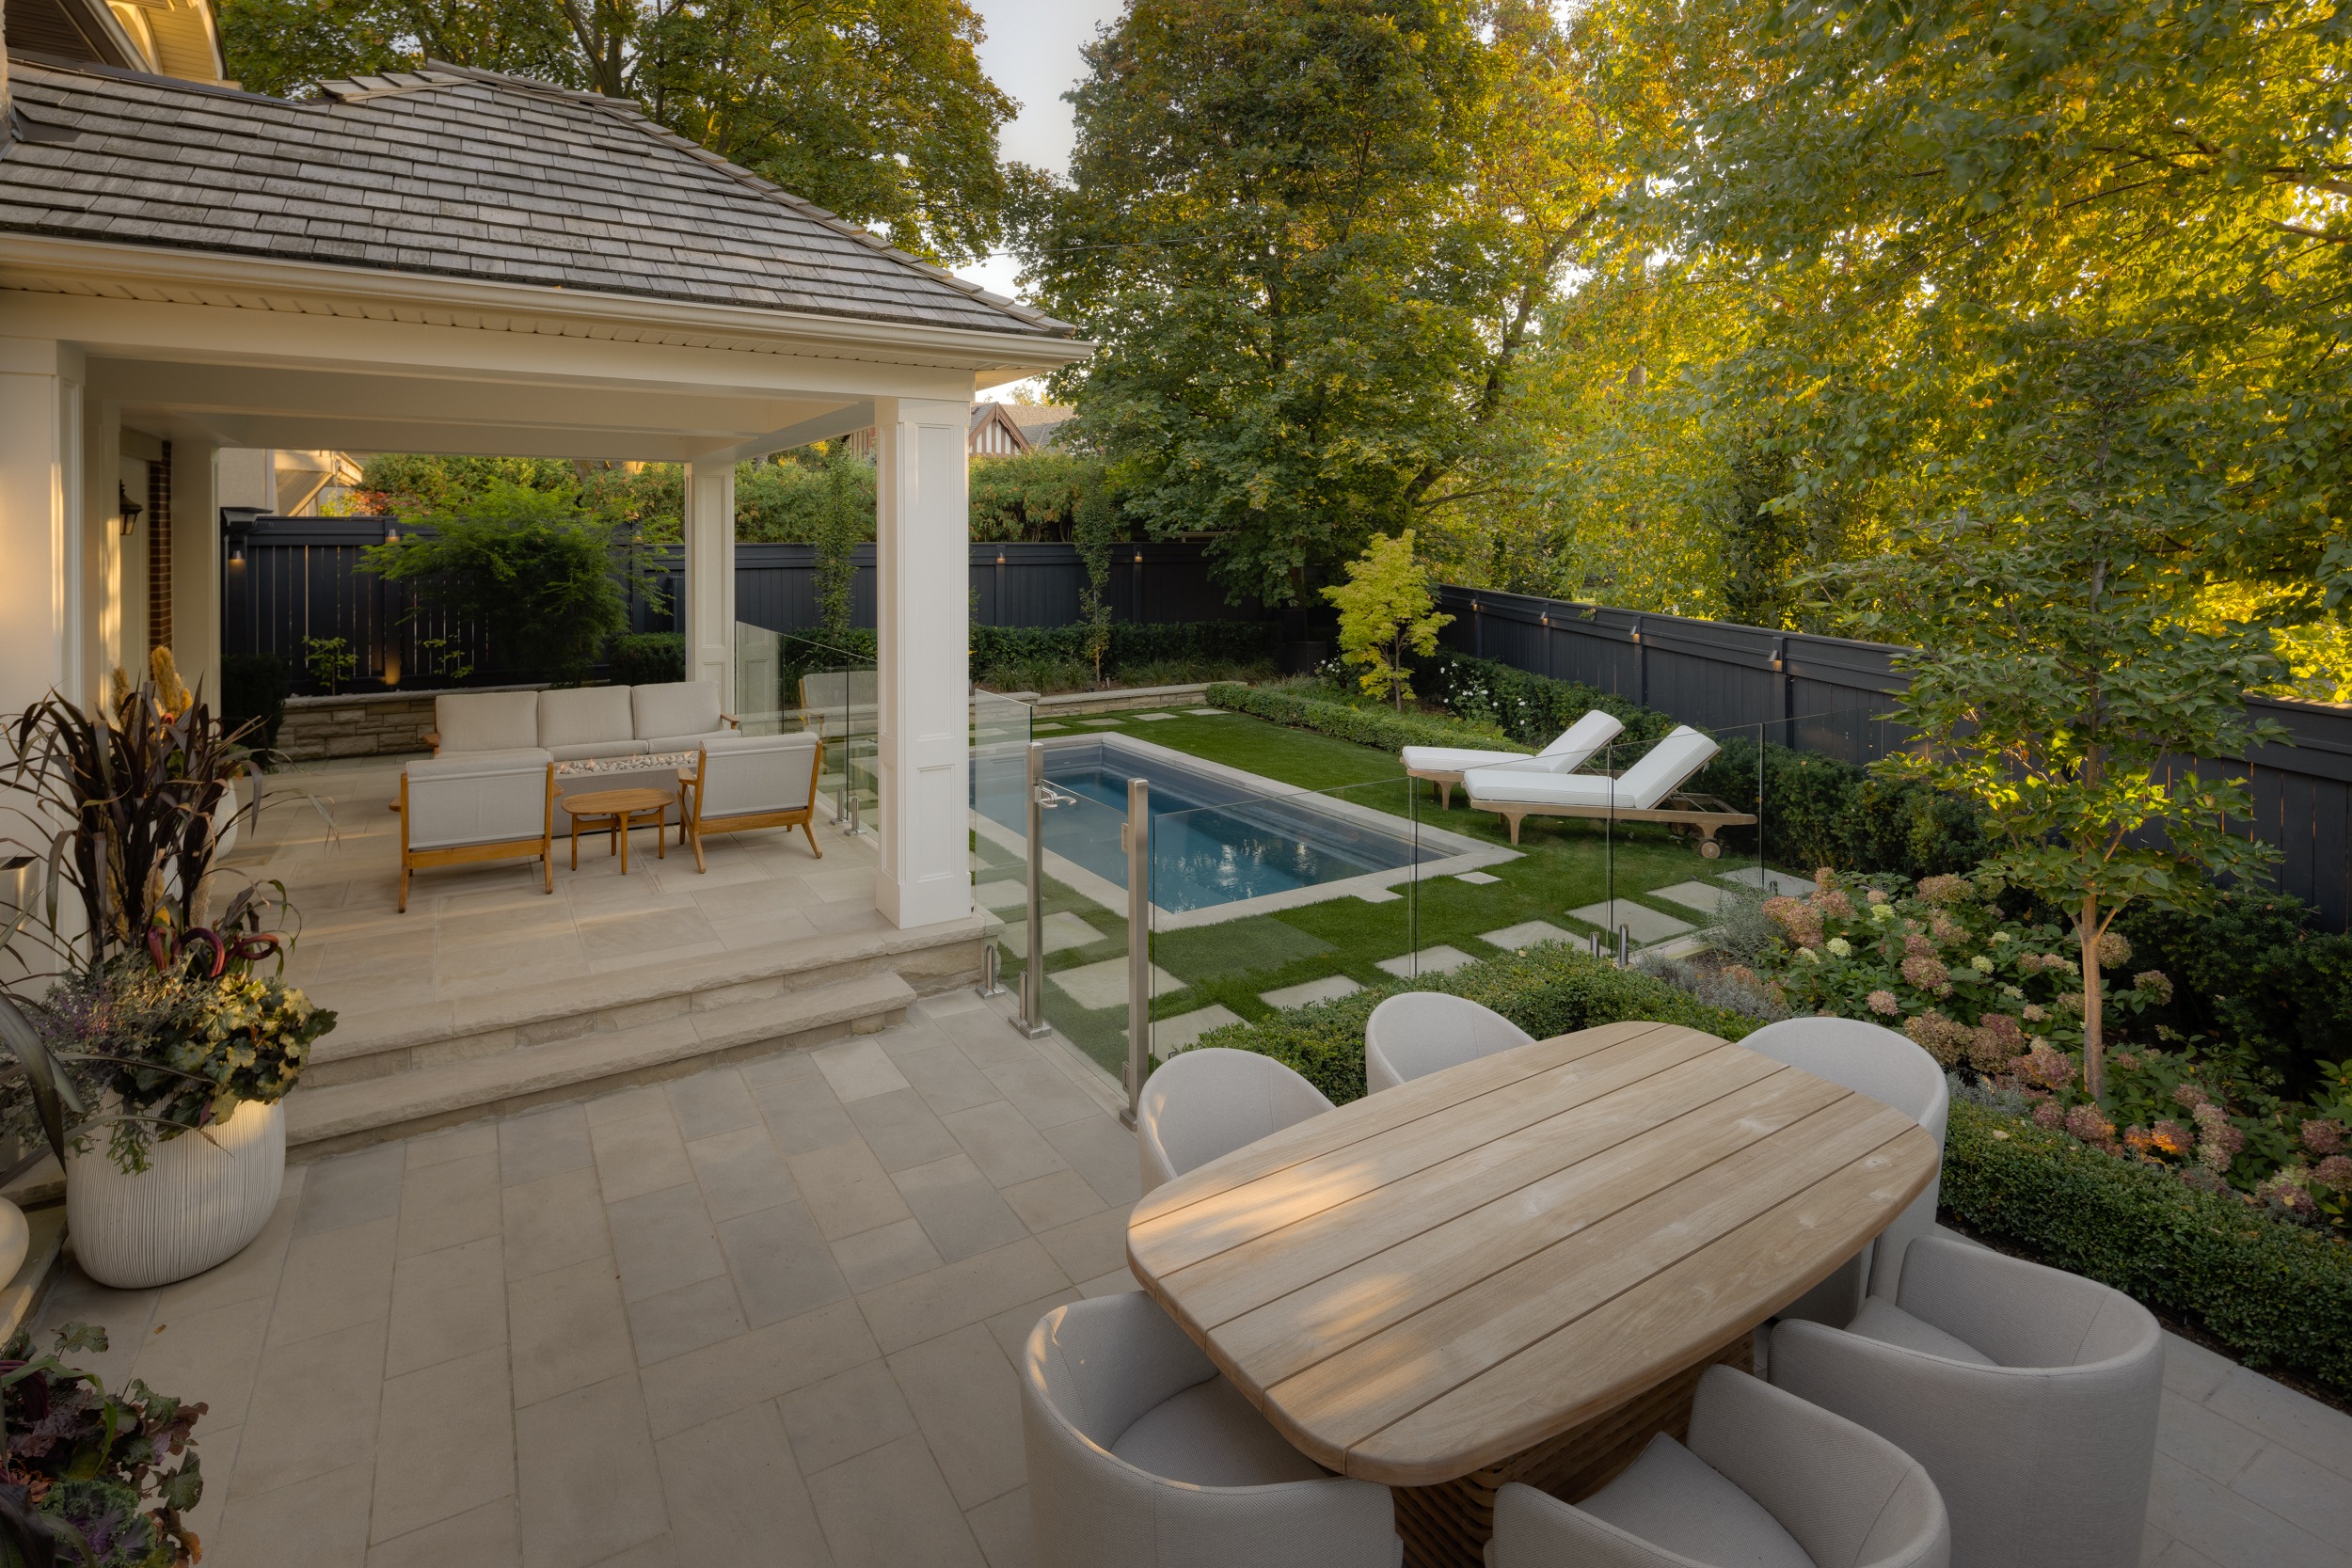 Urban Backyard with pool, covered porch seating area and patio dining table and chairs